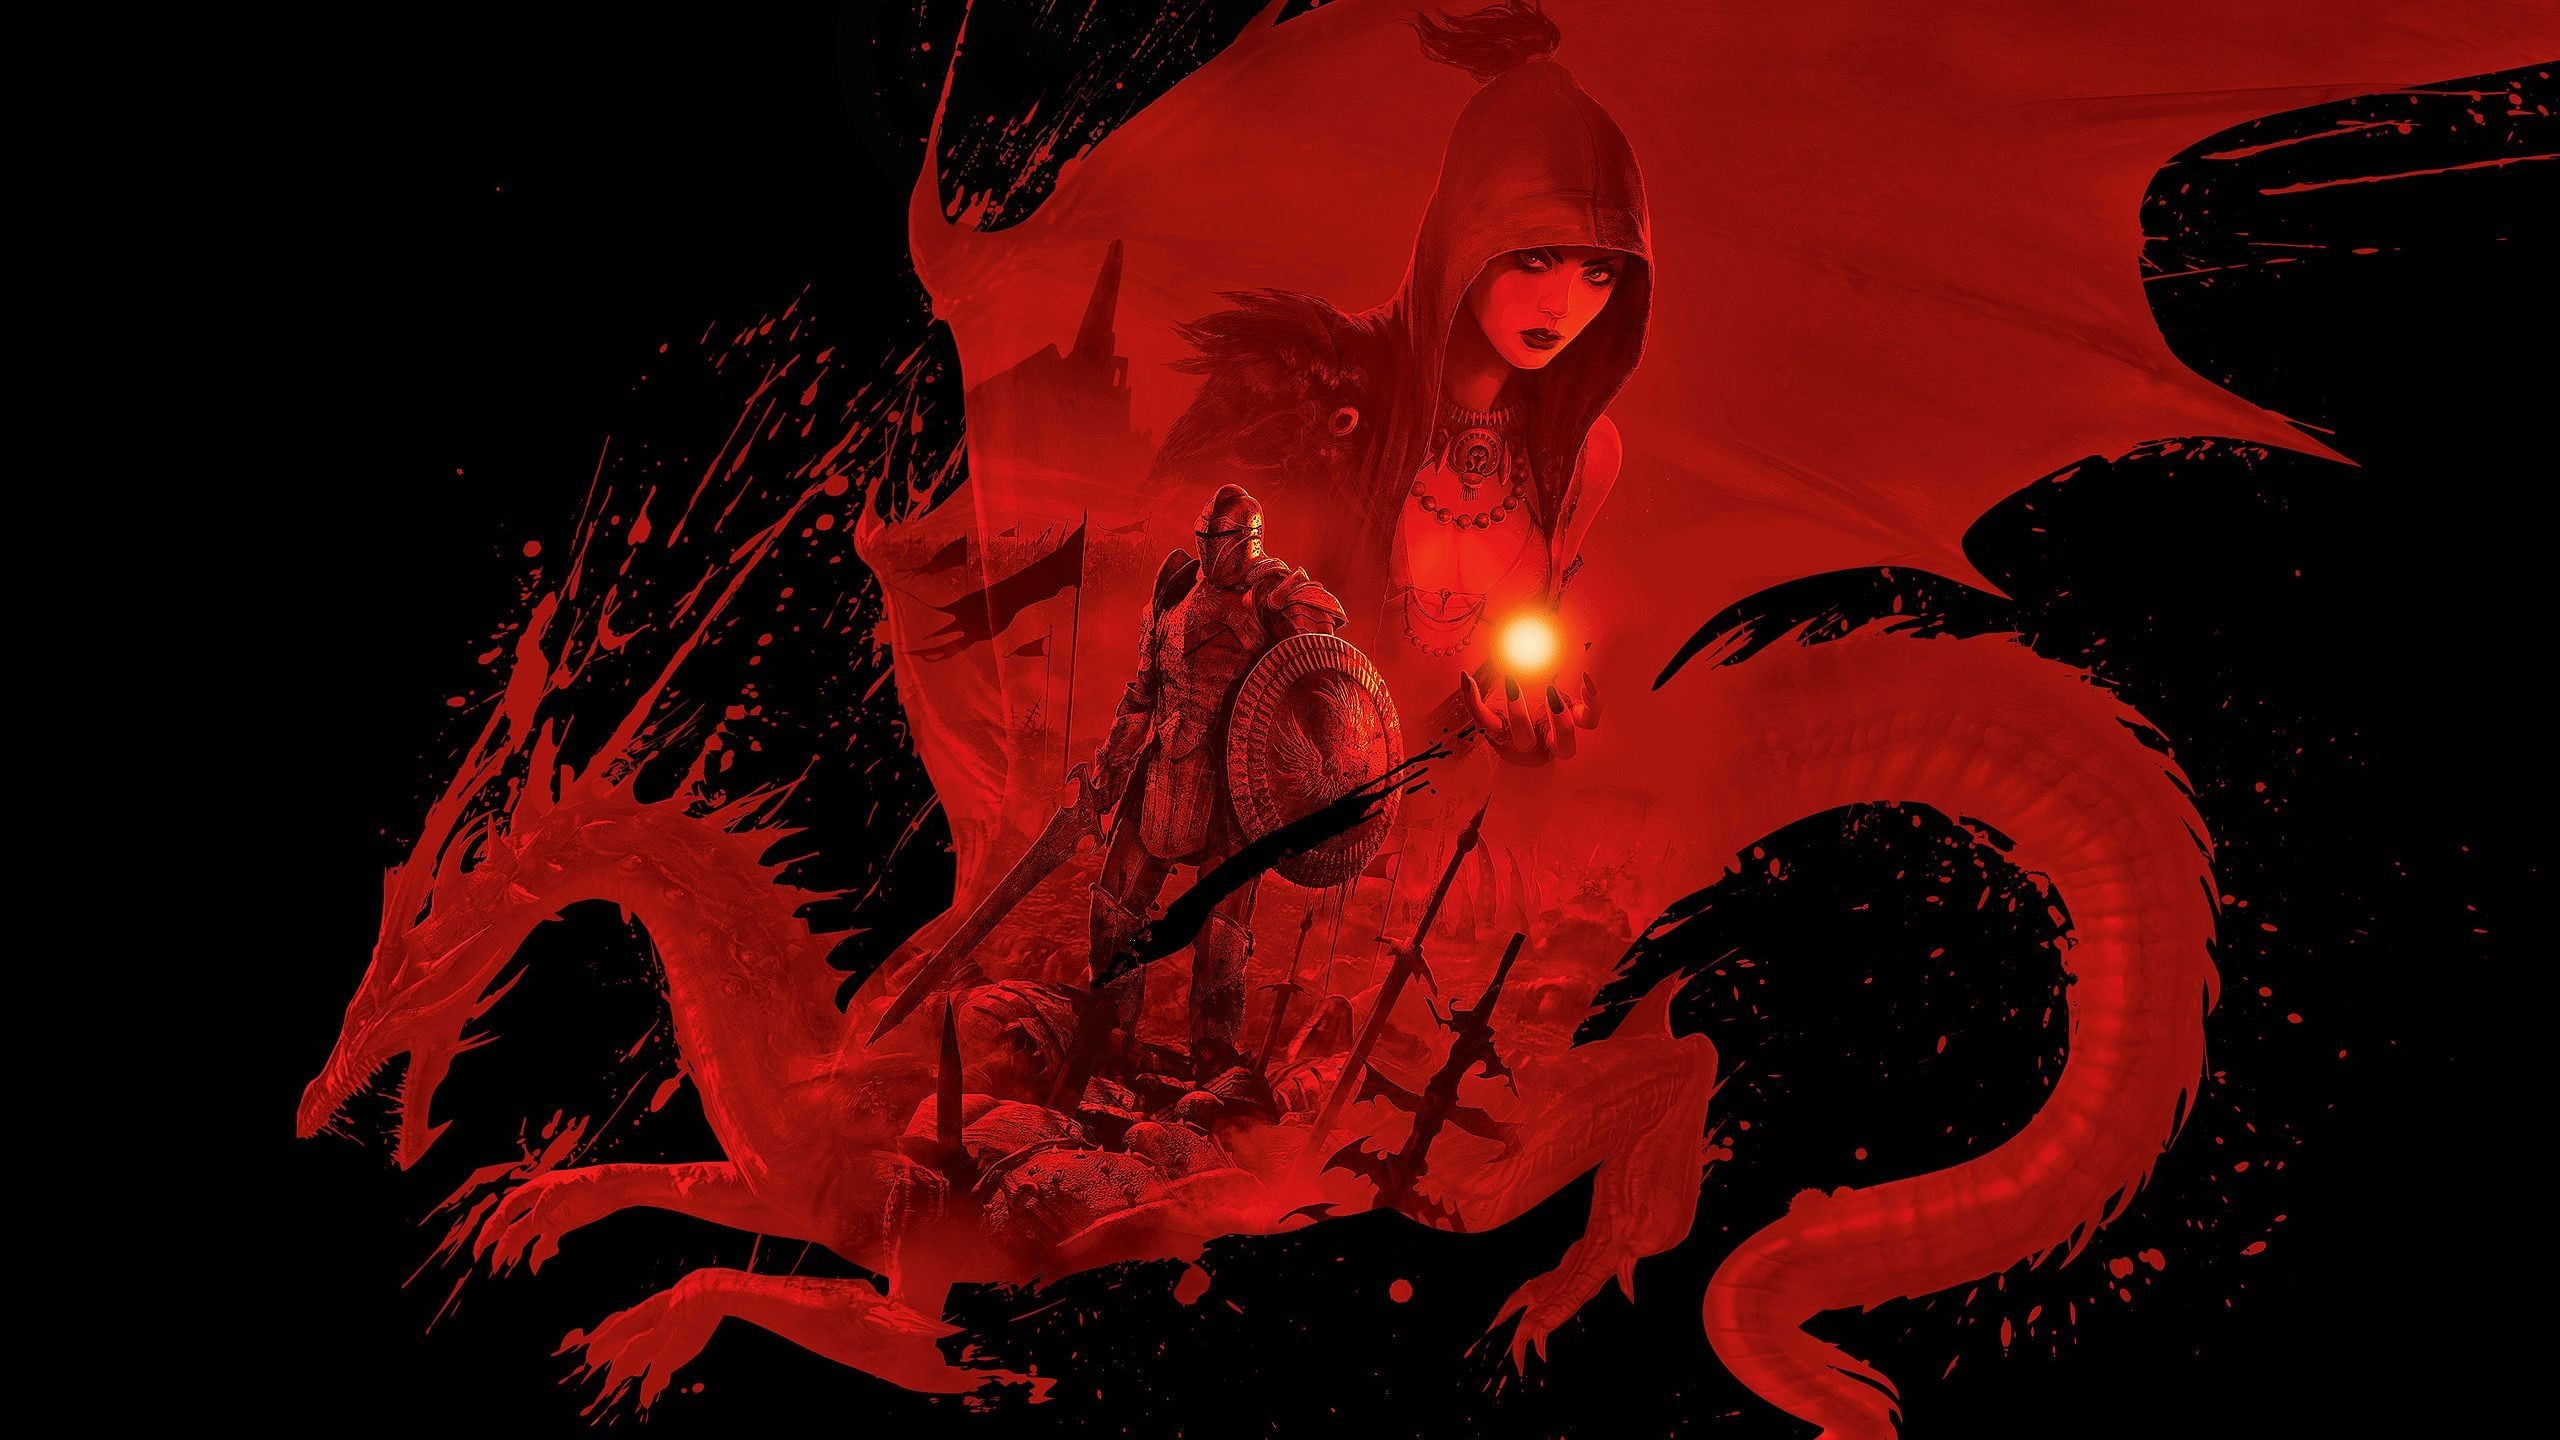 red dragon and knight illustration, video games, Dragon Age, Dragon Age: Origins, Morrigan (character)